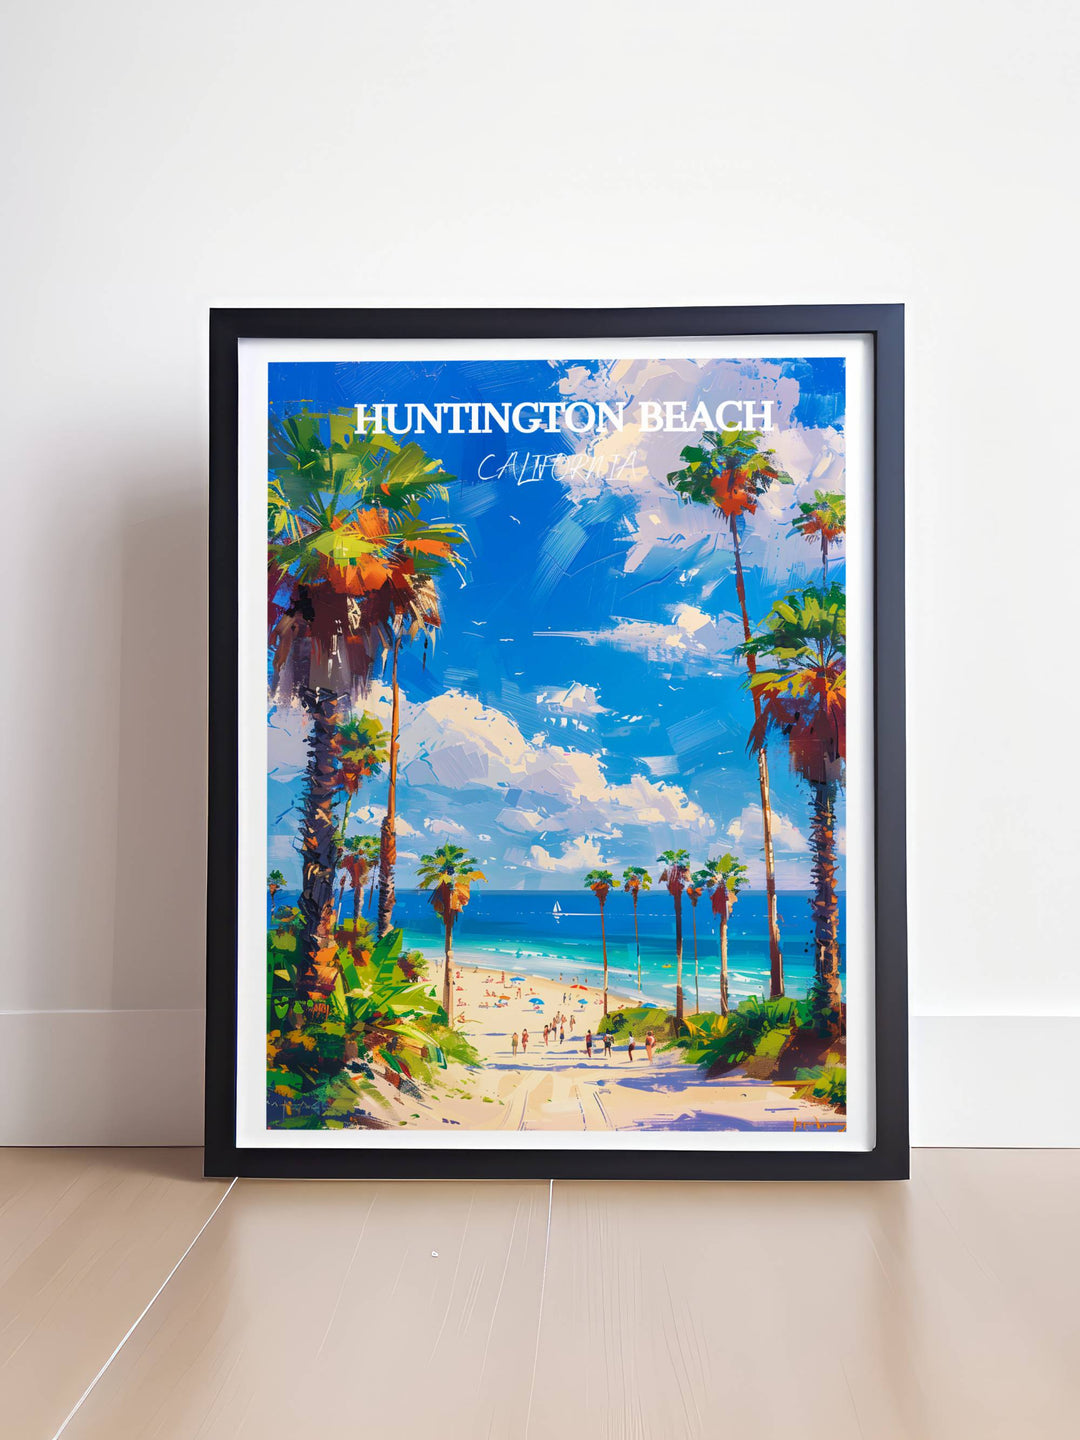 Discover the sun-soaked charm of Huntington Beach, California, through our captivating Travel Wall Art Poster Print—an ideal housewarming gift celebrating Surf City's vibrant spirit. Whether you're a local enthusiast or a traveler seeking memories, this print beautifully captures the essence of this coastal gem.